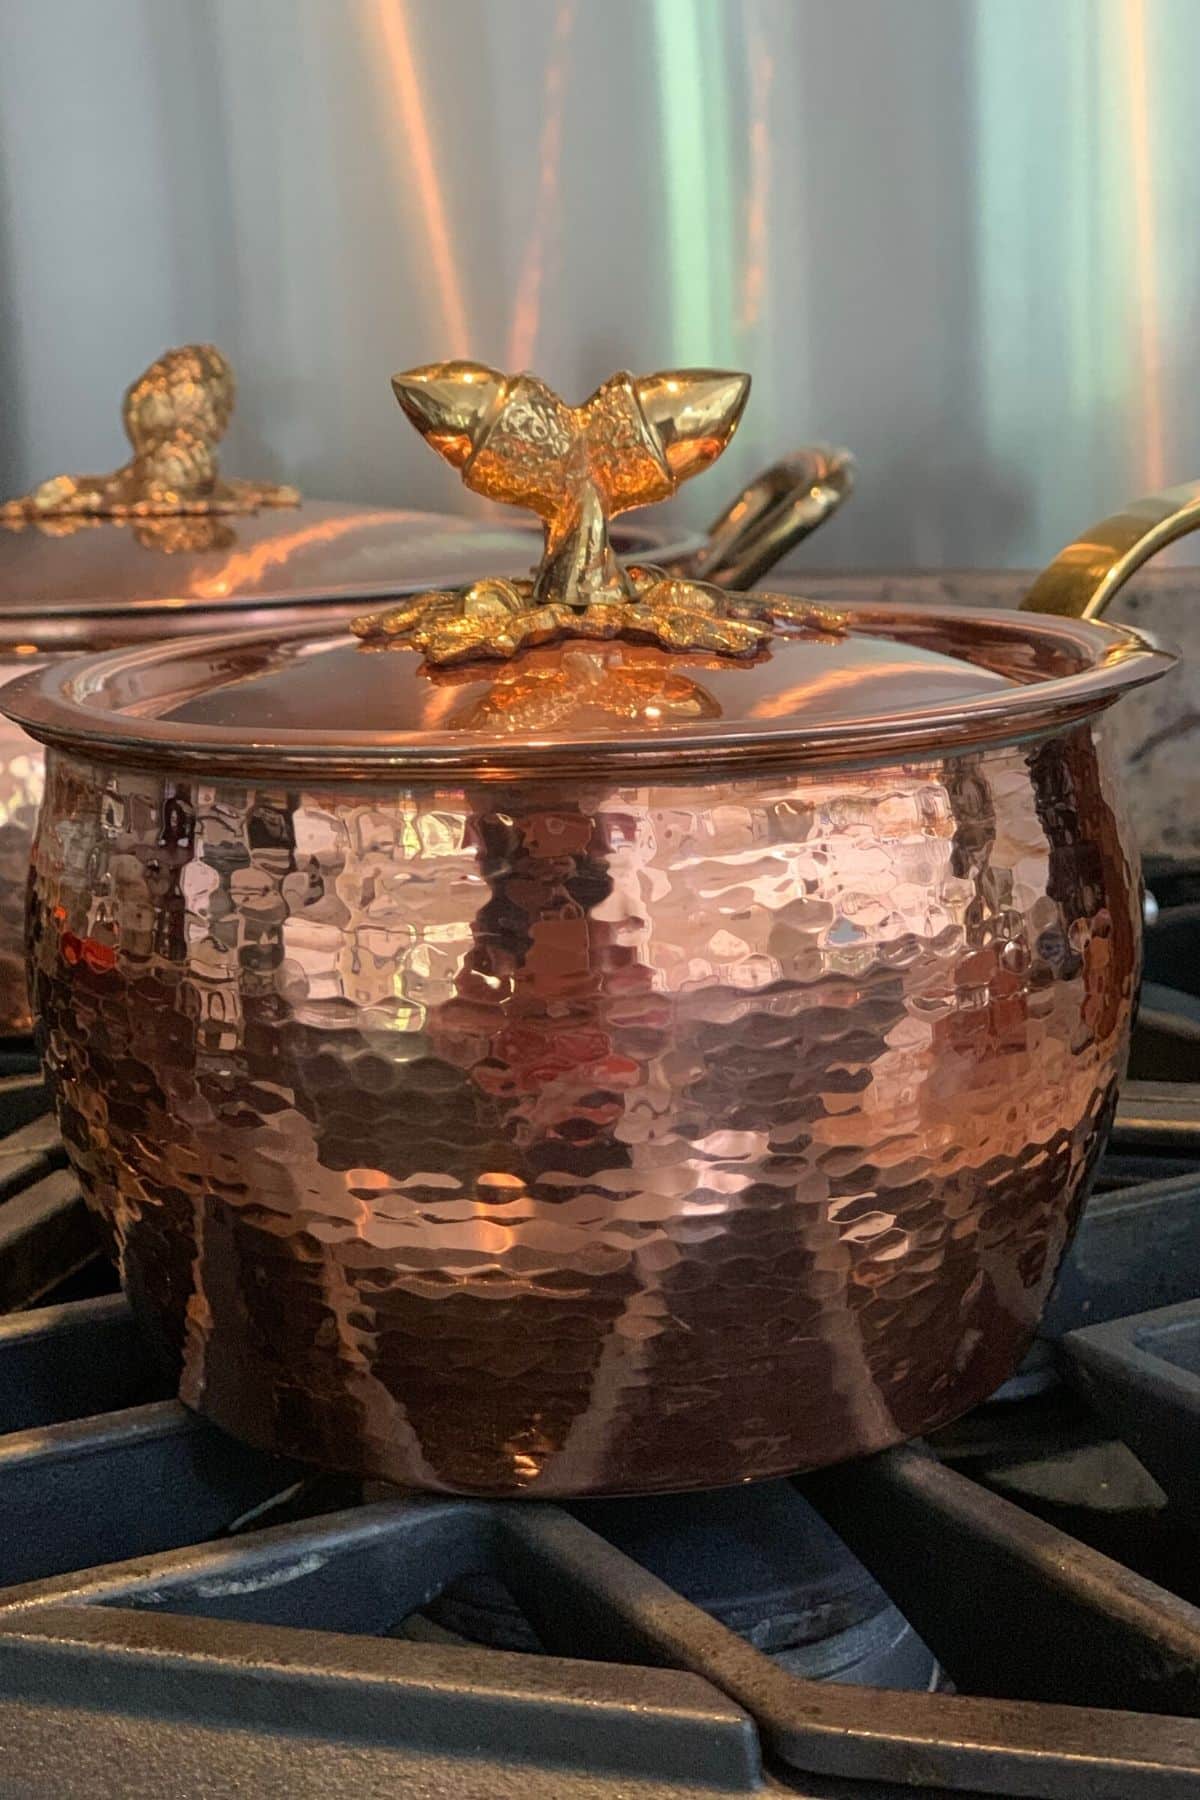 copper cookware on stovetop.